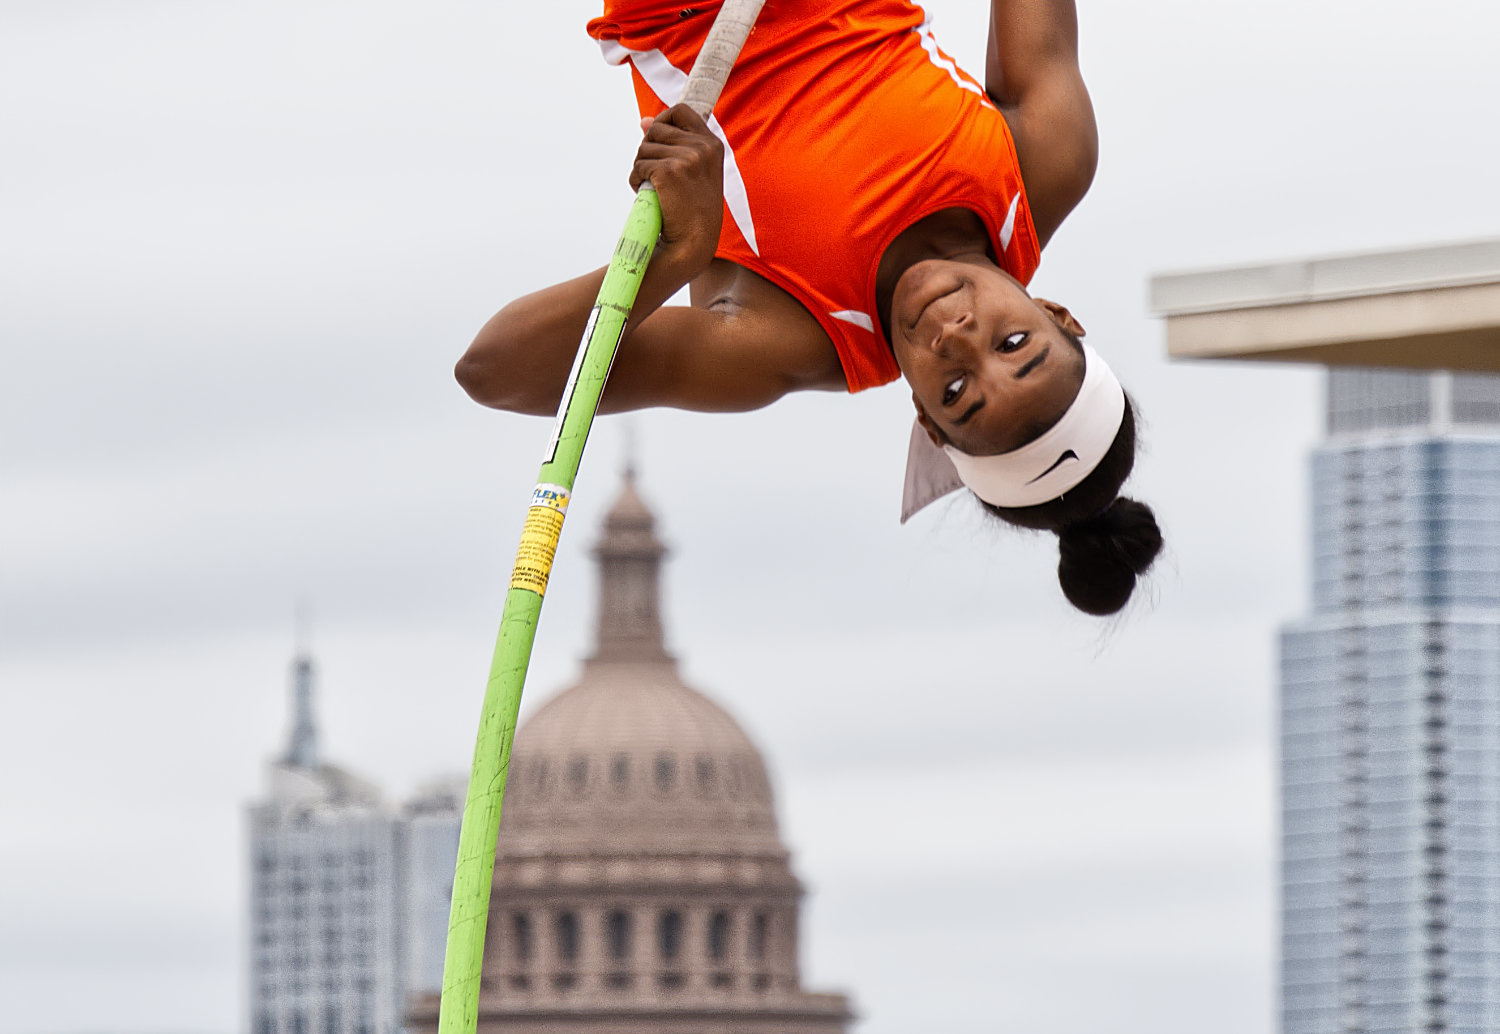 Abby Kratzmeyer of Mineola flew to a state championship in the girls 3A pole vault at the UIL state track and field meet Friday in Austin.

After missing a couple early attempts, Kratzmeyer quickly eclipsed her competition.

“I was so excited to go for the record and I had some close attempts, but next year, I got it,” said the sophomore.